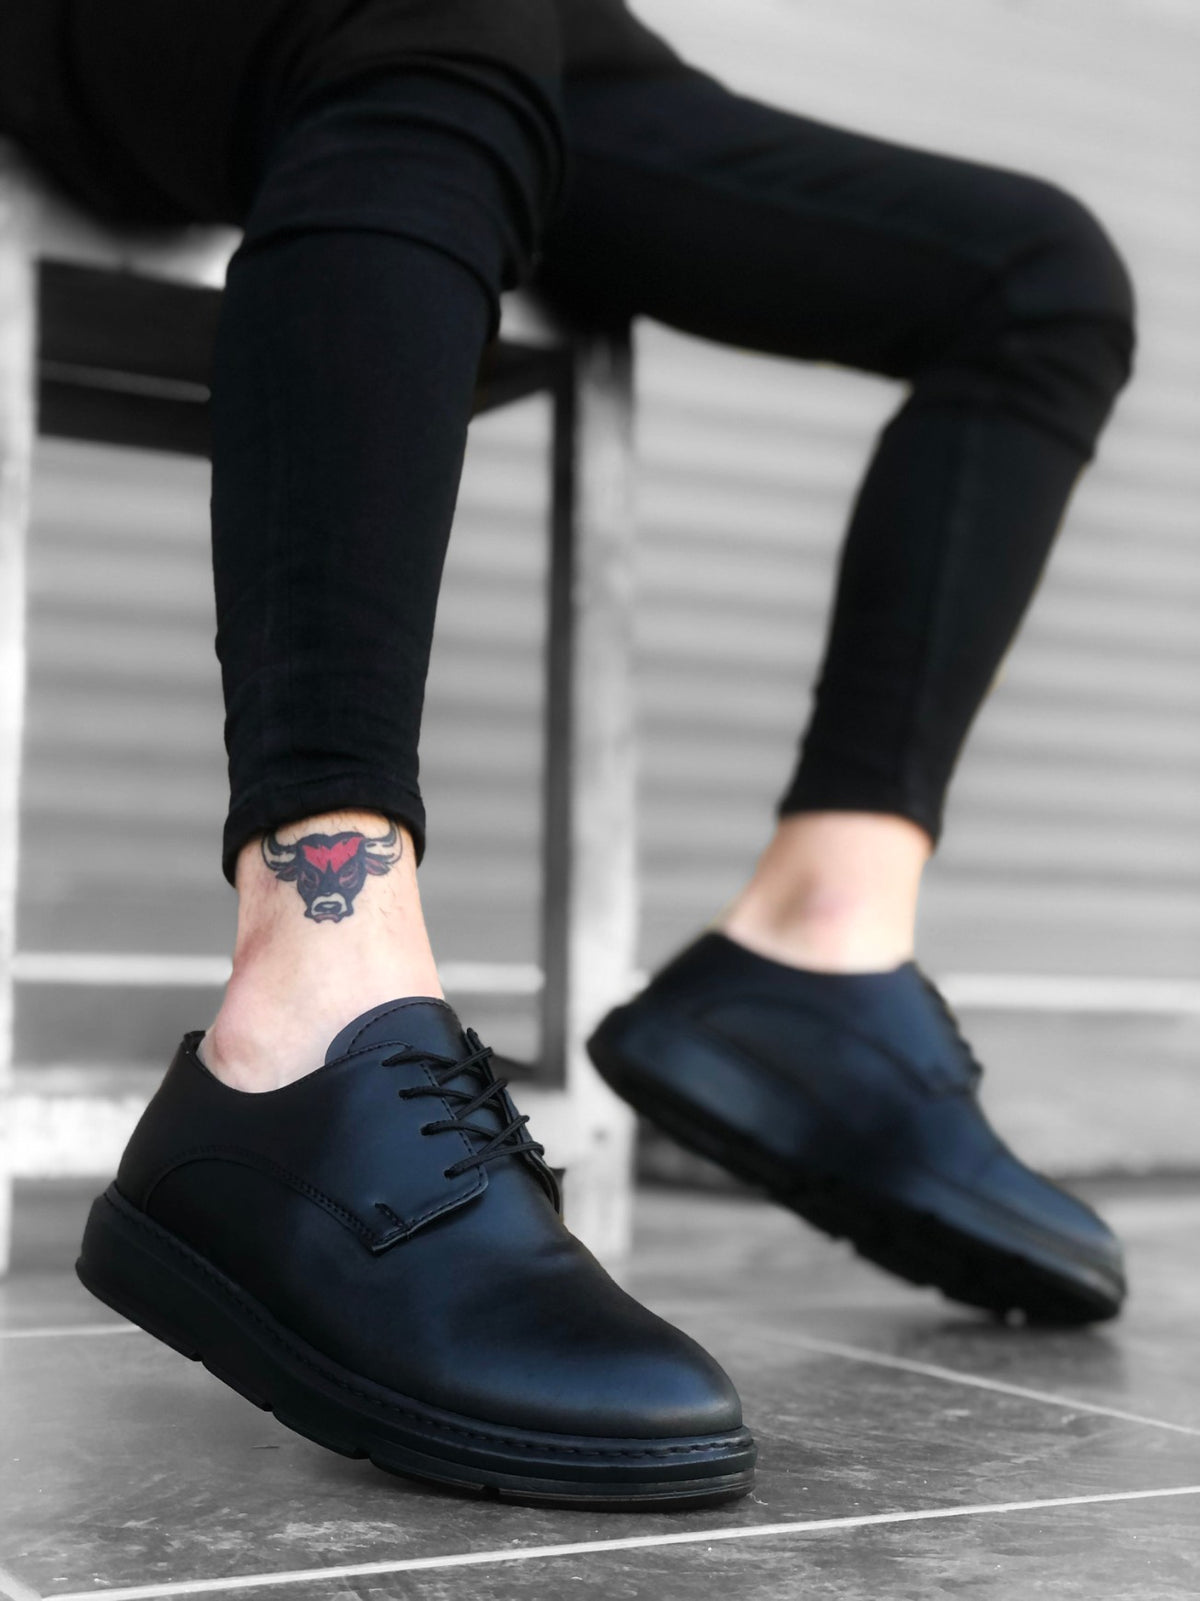 BA0003 Lace-Up Classic Black High Black Sole Casual Men's Shoes - STREETMODE ™